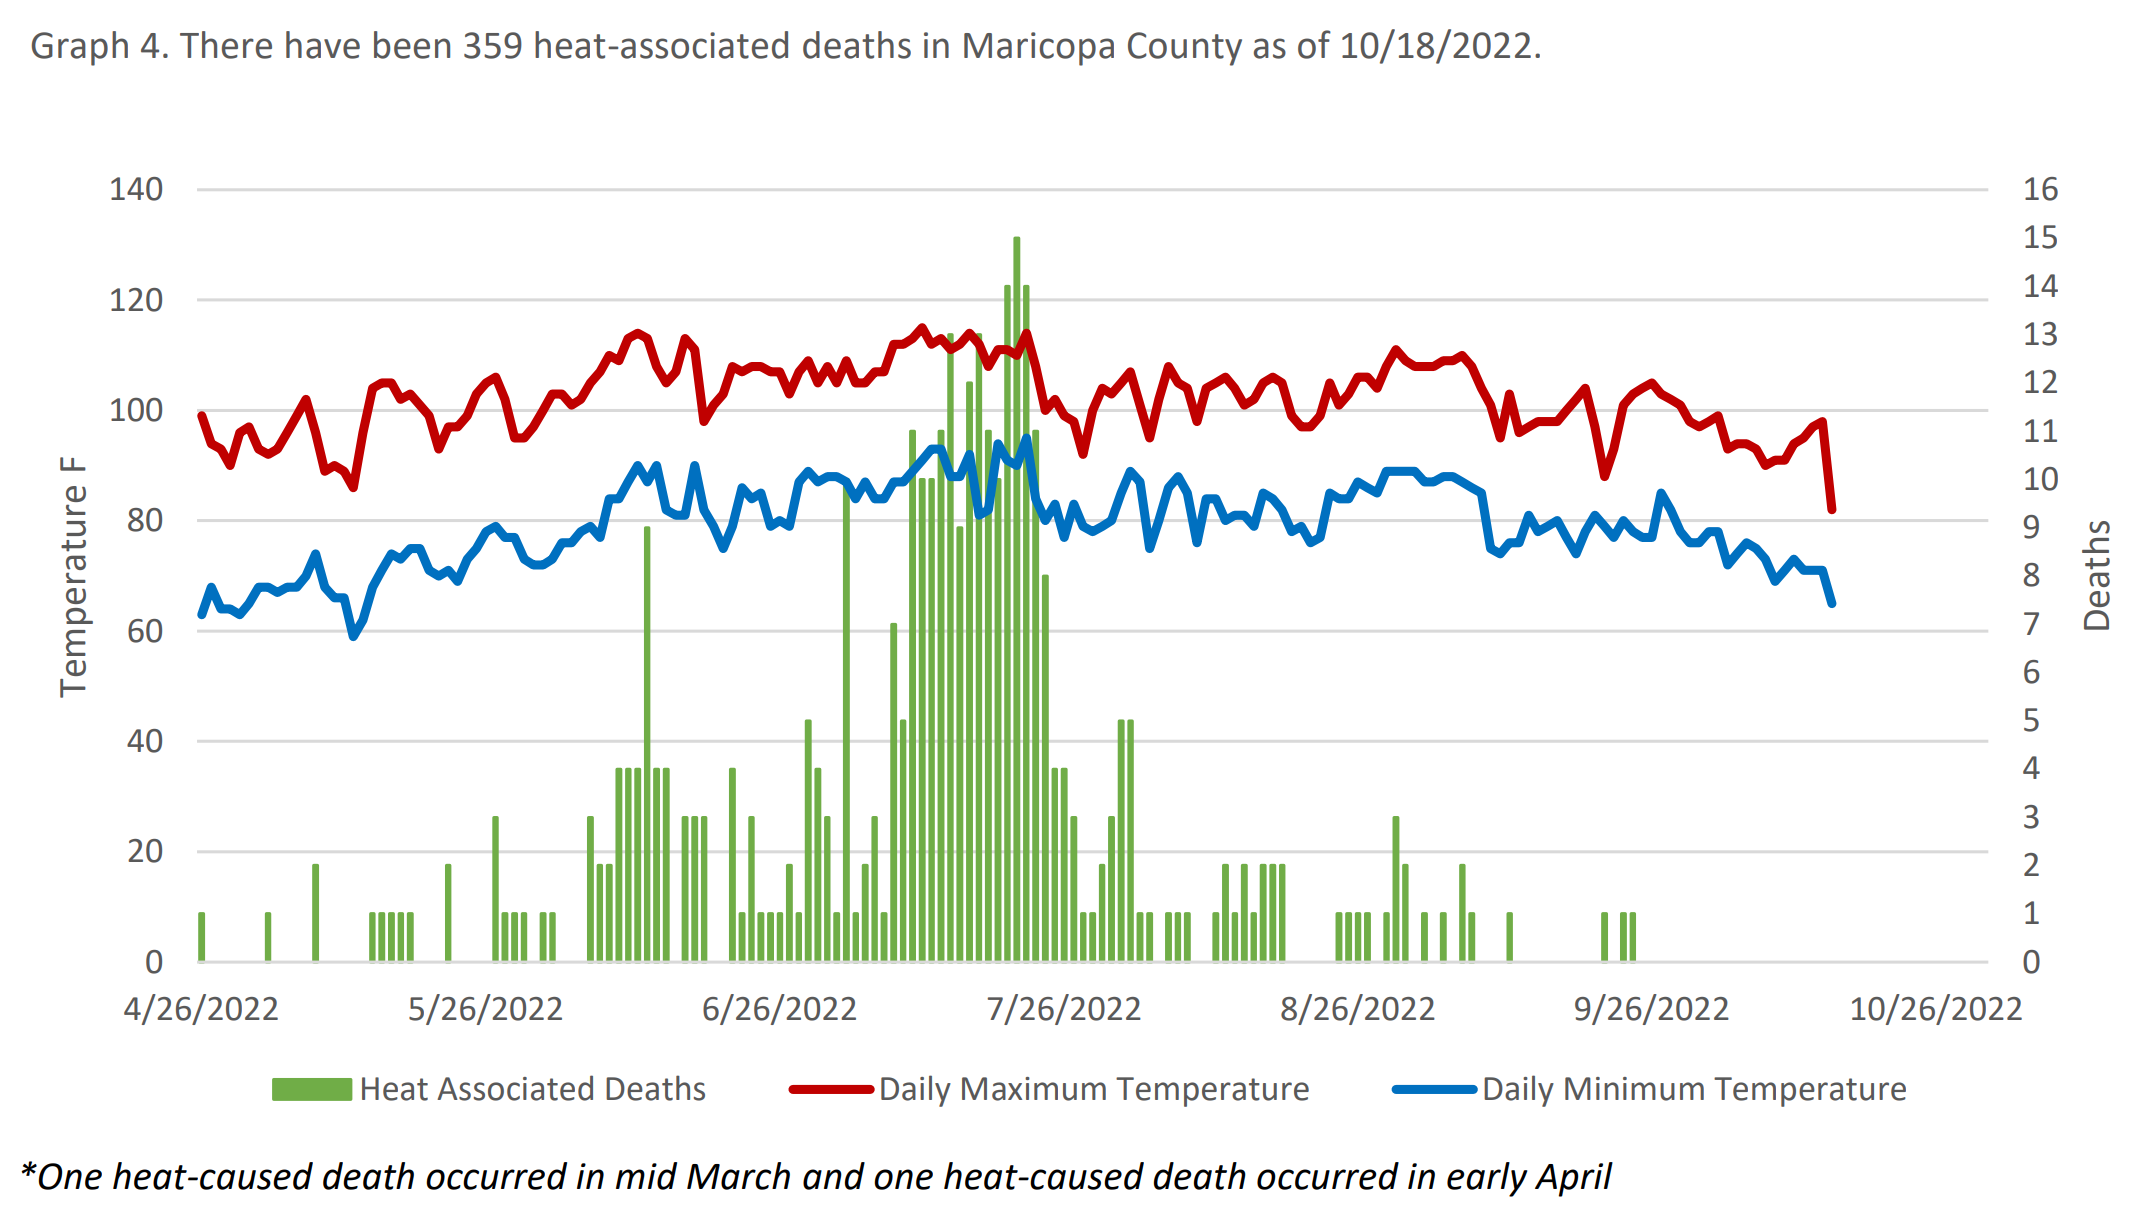 Heat-associated deaths in Maricopa County, Arizona, 26 April - 18 October 2022. Daily maximum temperatures and daily minimum temperatures are also shown. Graphic: Maricopa County Department of Public Health